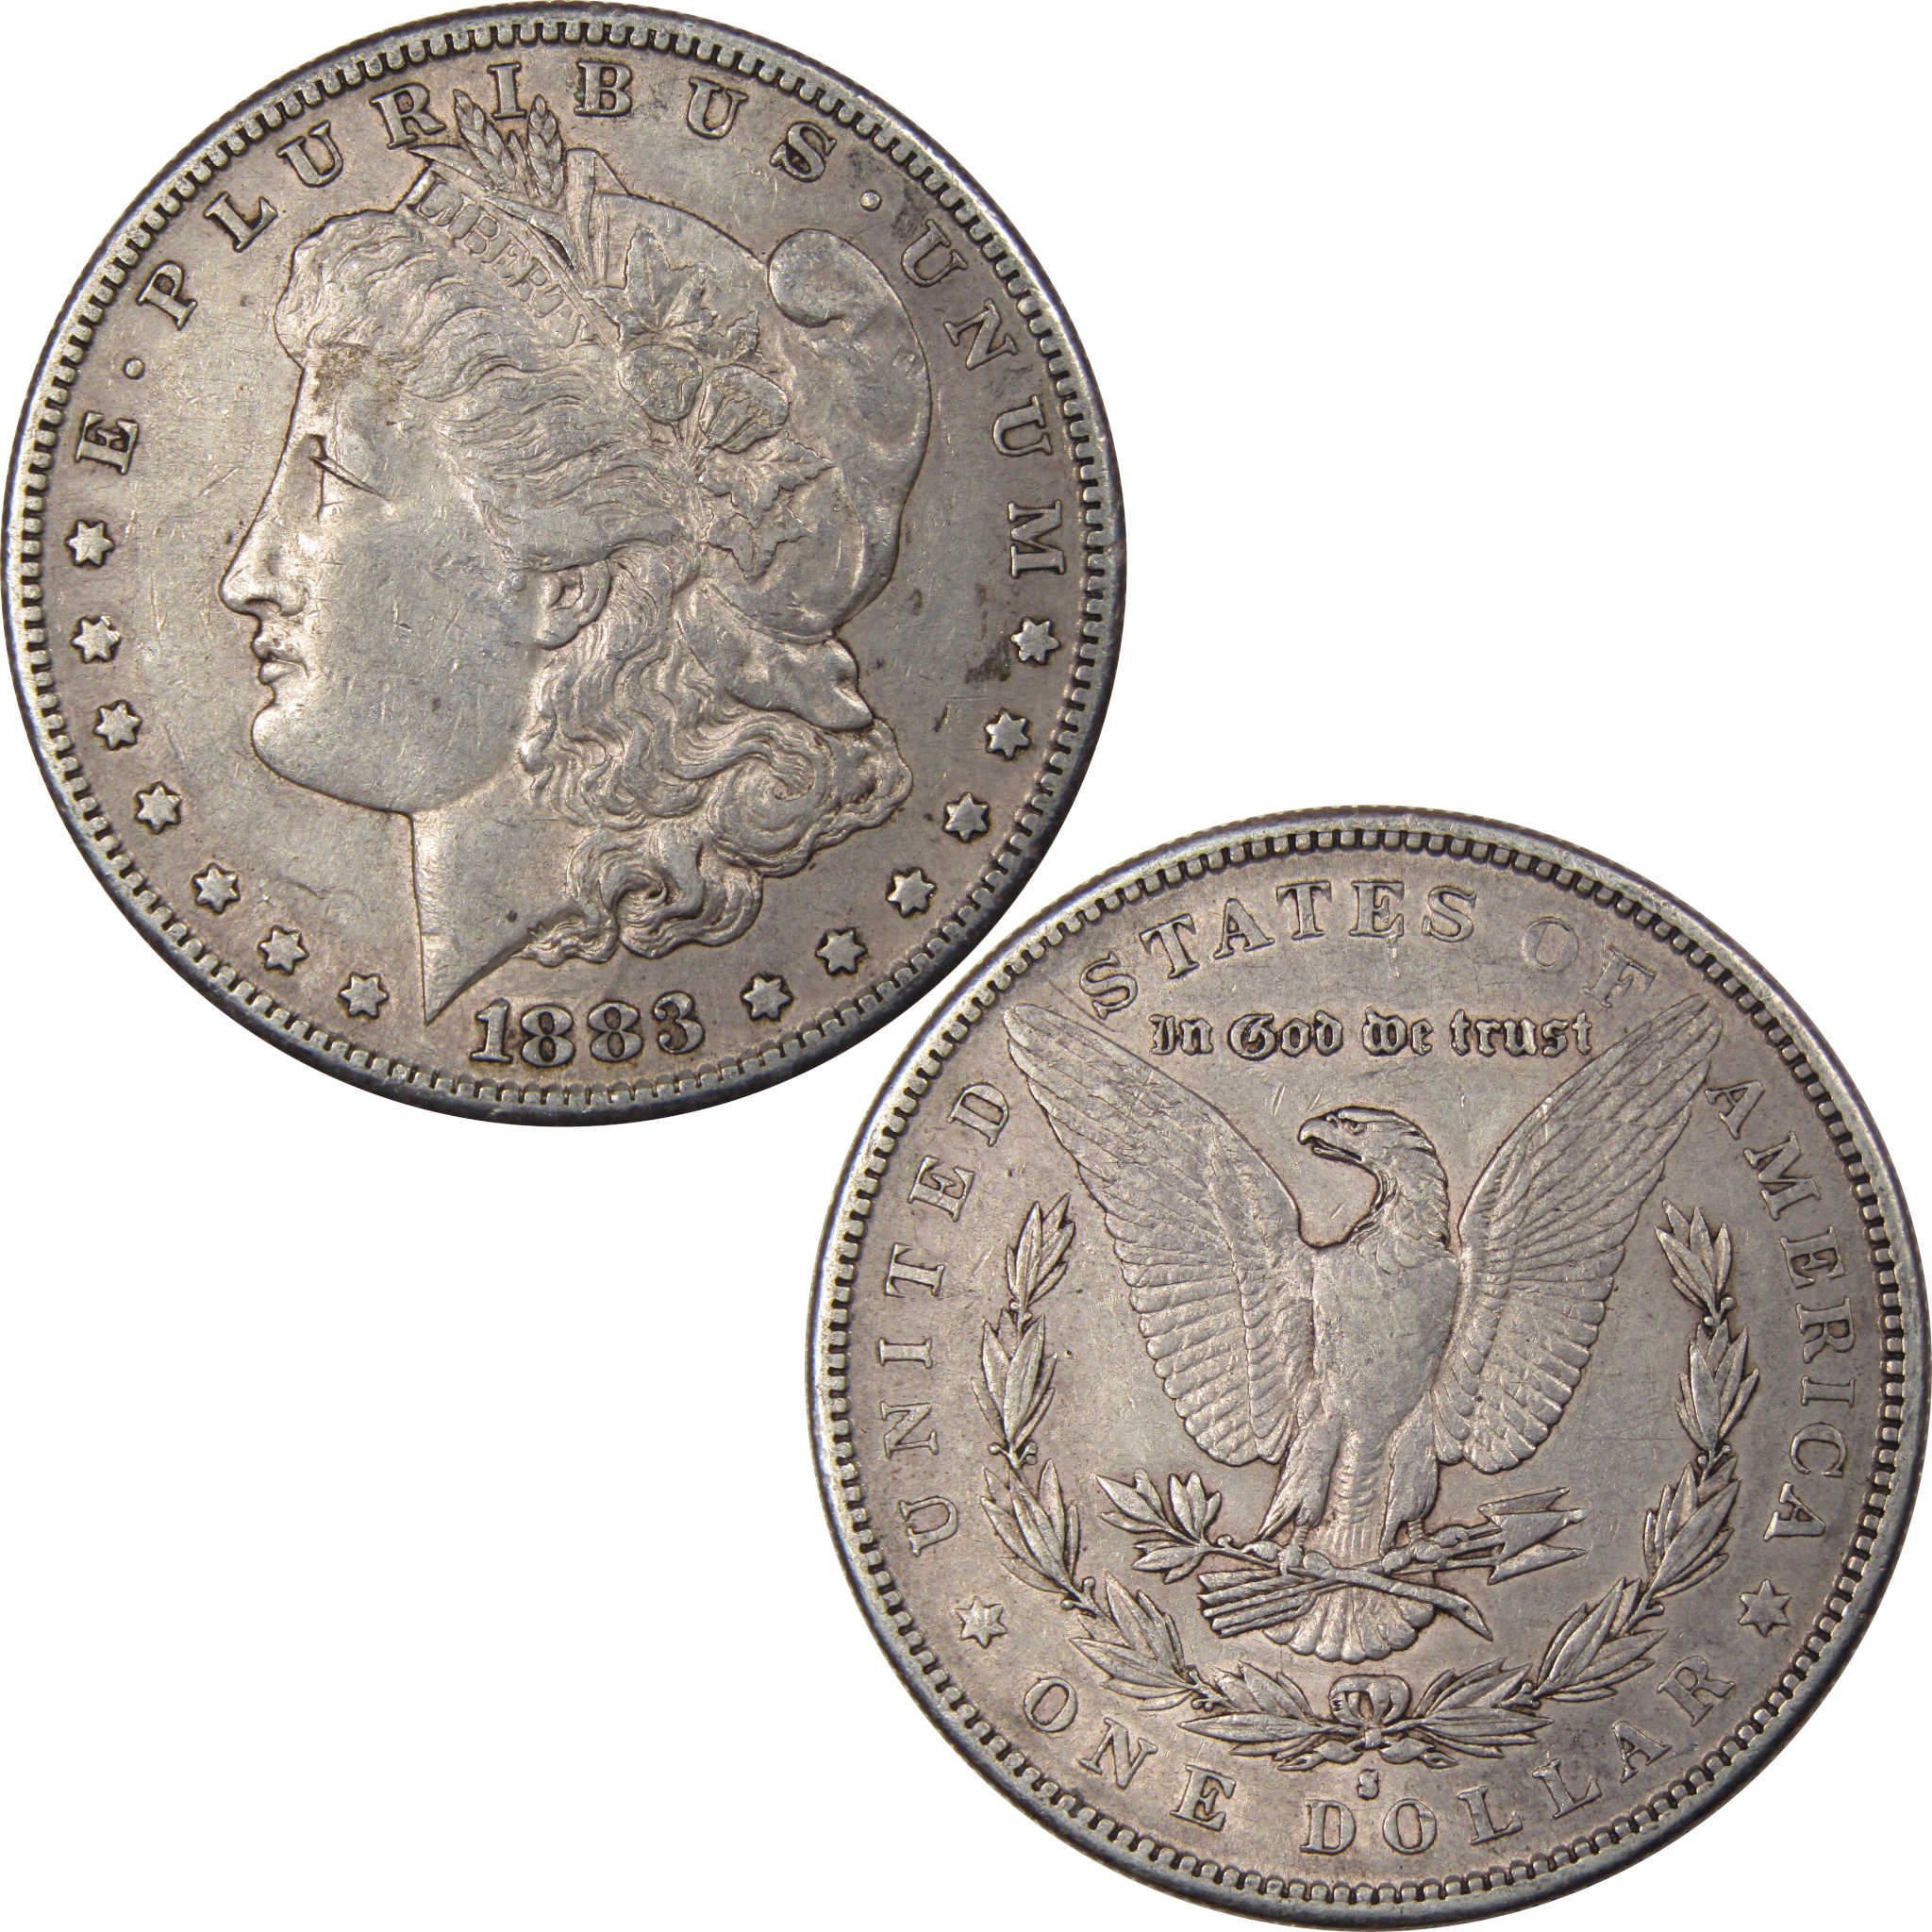 1883 S Morgan Dollar XF EF Extremely Fine 90% Silver Coin SKU:I1111 - Morgan coin - Morgan silver dollar - Morgan silver dollar for sale - Profile Coins &amp; Collectibles